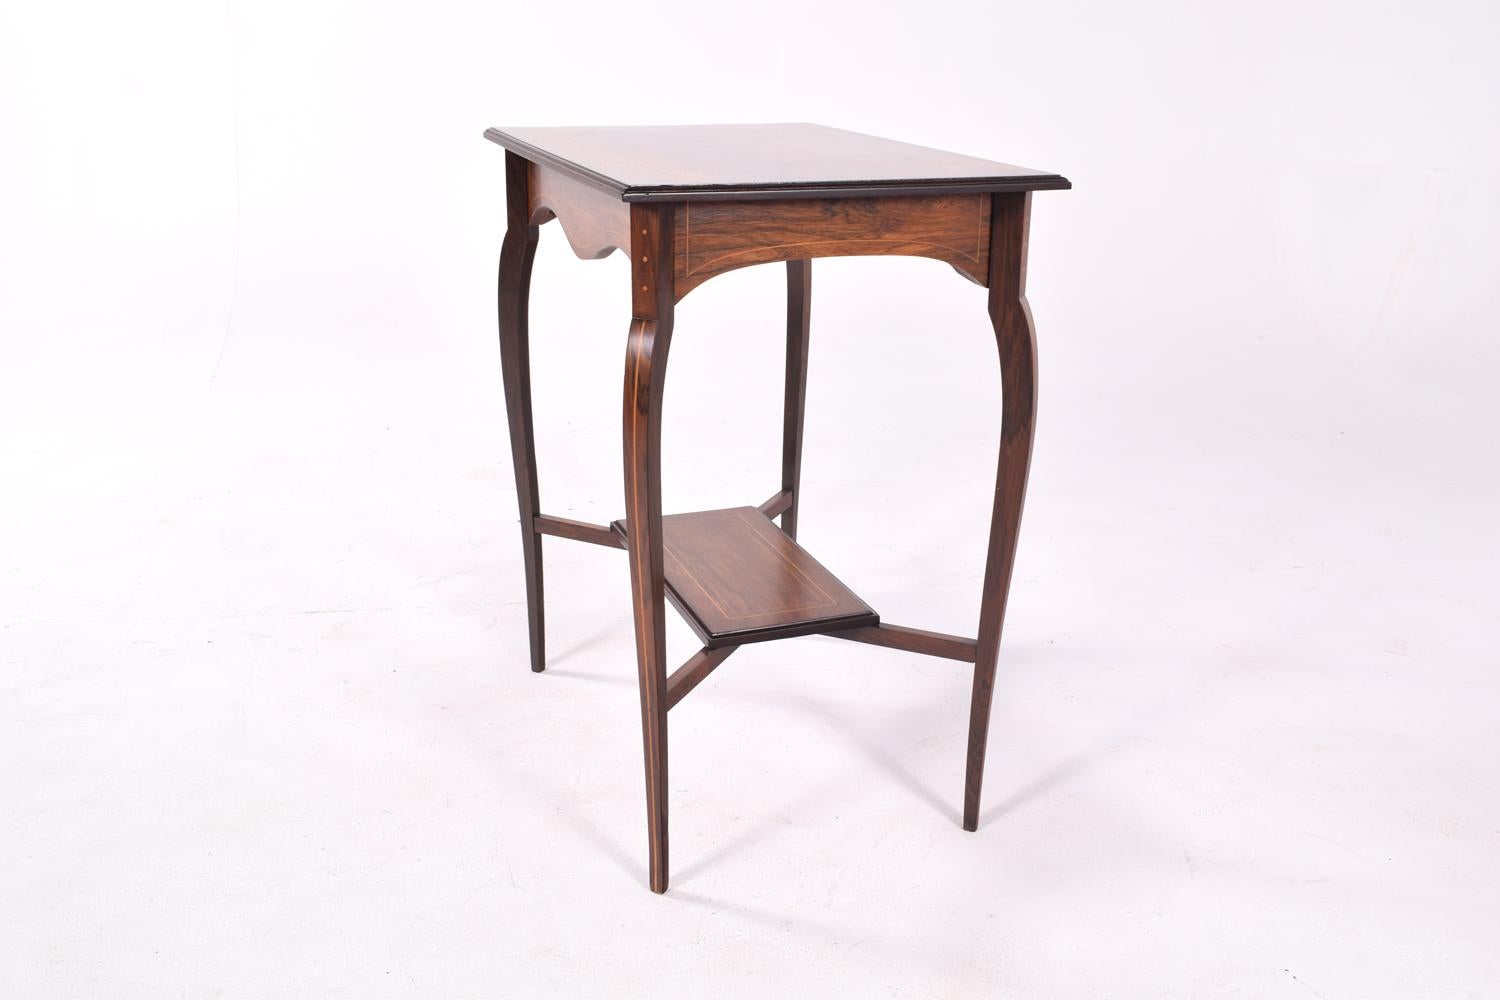 This fine decorative inlaid rosewood Edwardian, antique side table or occasional table, dates from circa 1900. It has a rectangular top and stands on four tapering legs with a lower inlaid.